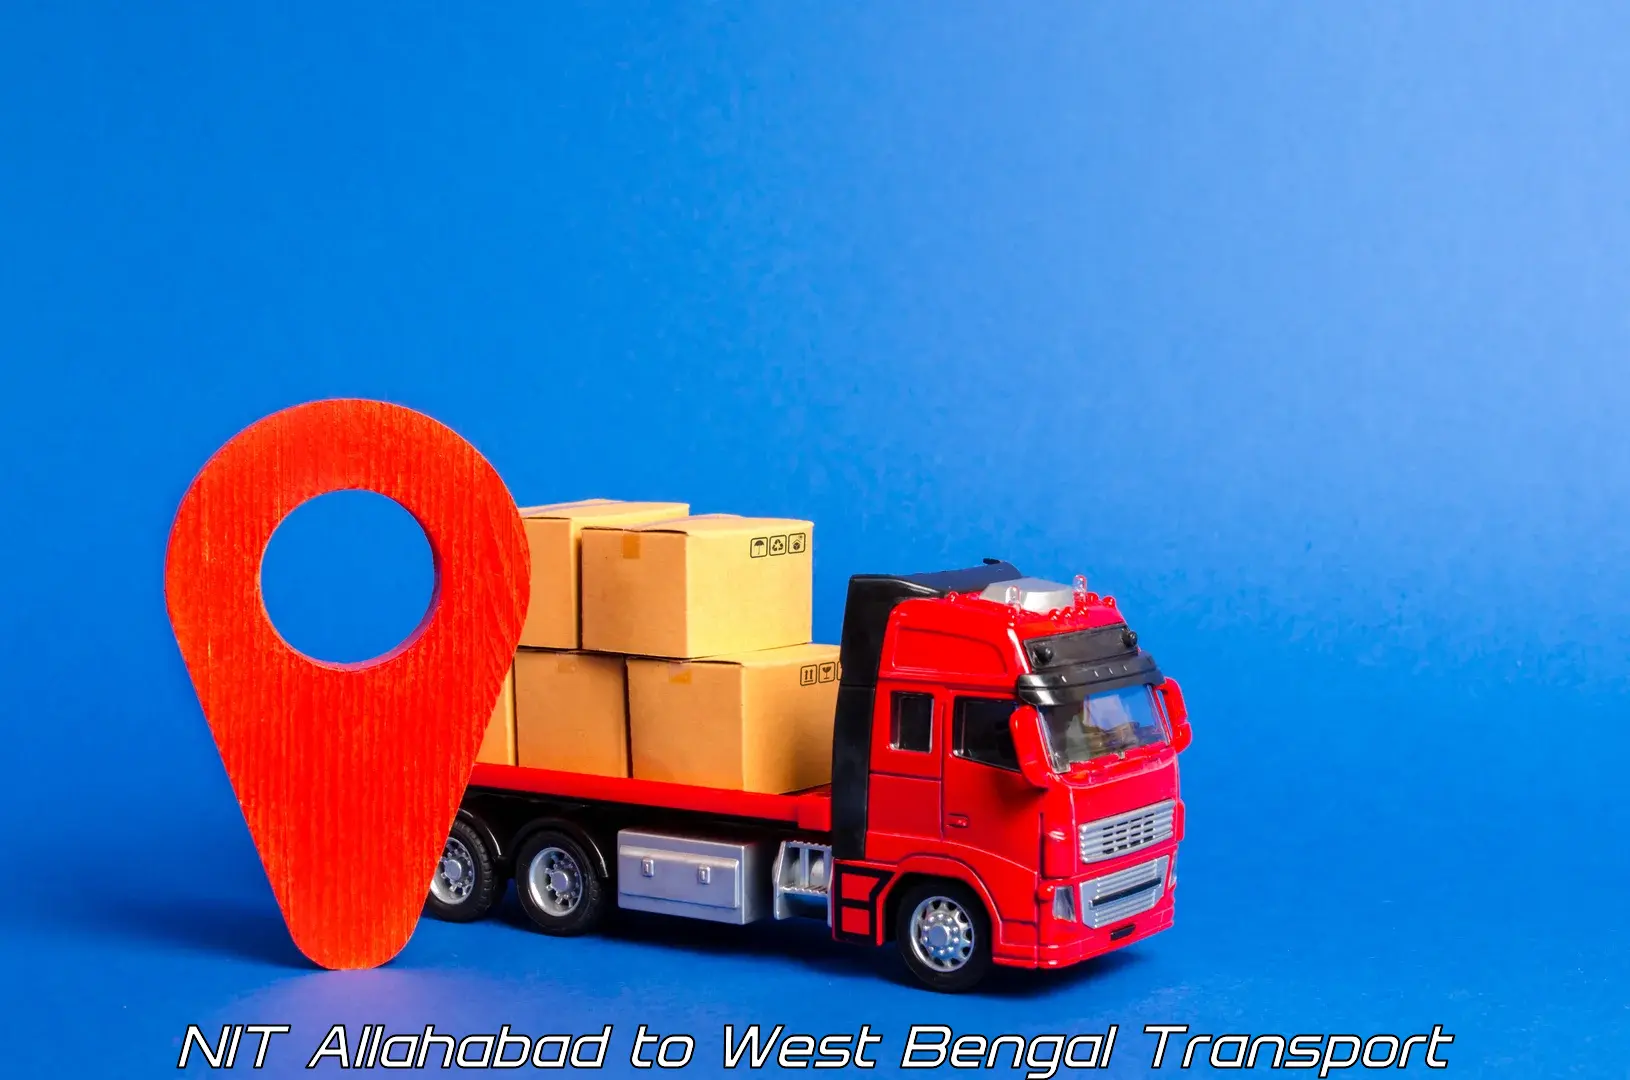 Lorry transport service in NIT Allahabad to West Bengal